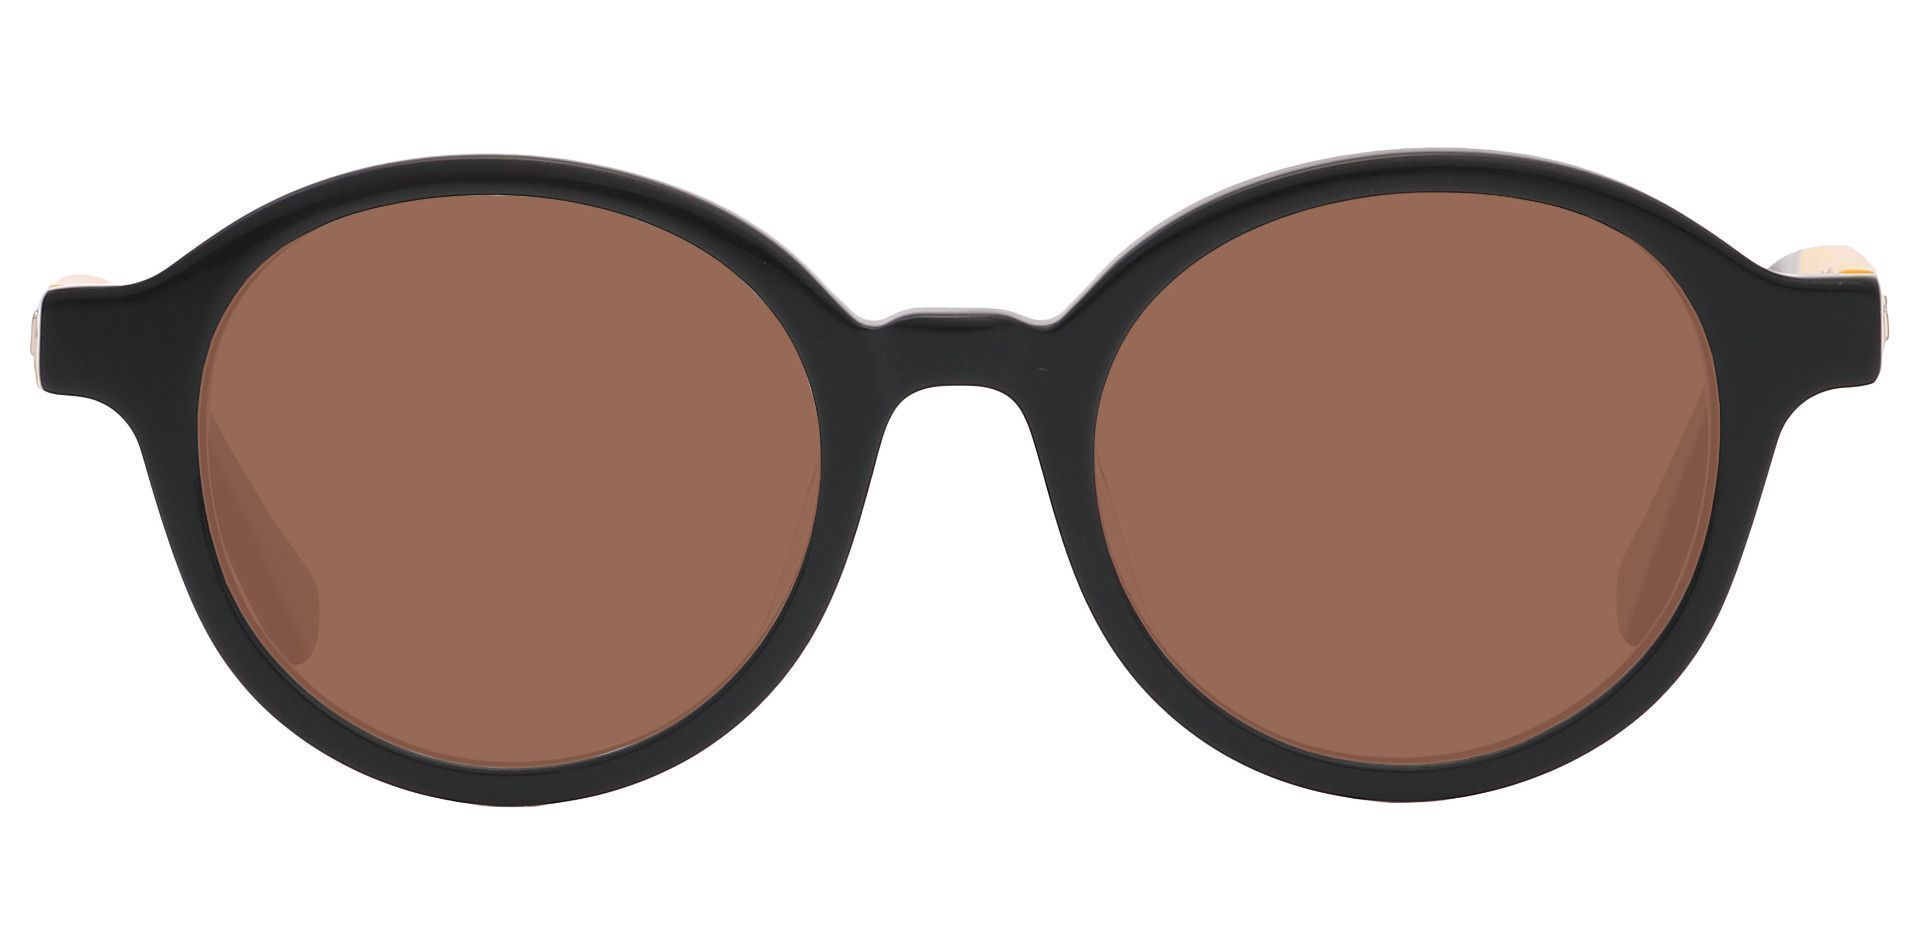 Champ Round Non-Rx Sunglasses - Black Frame With Brown Lenses